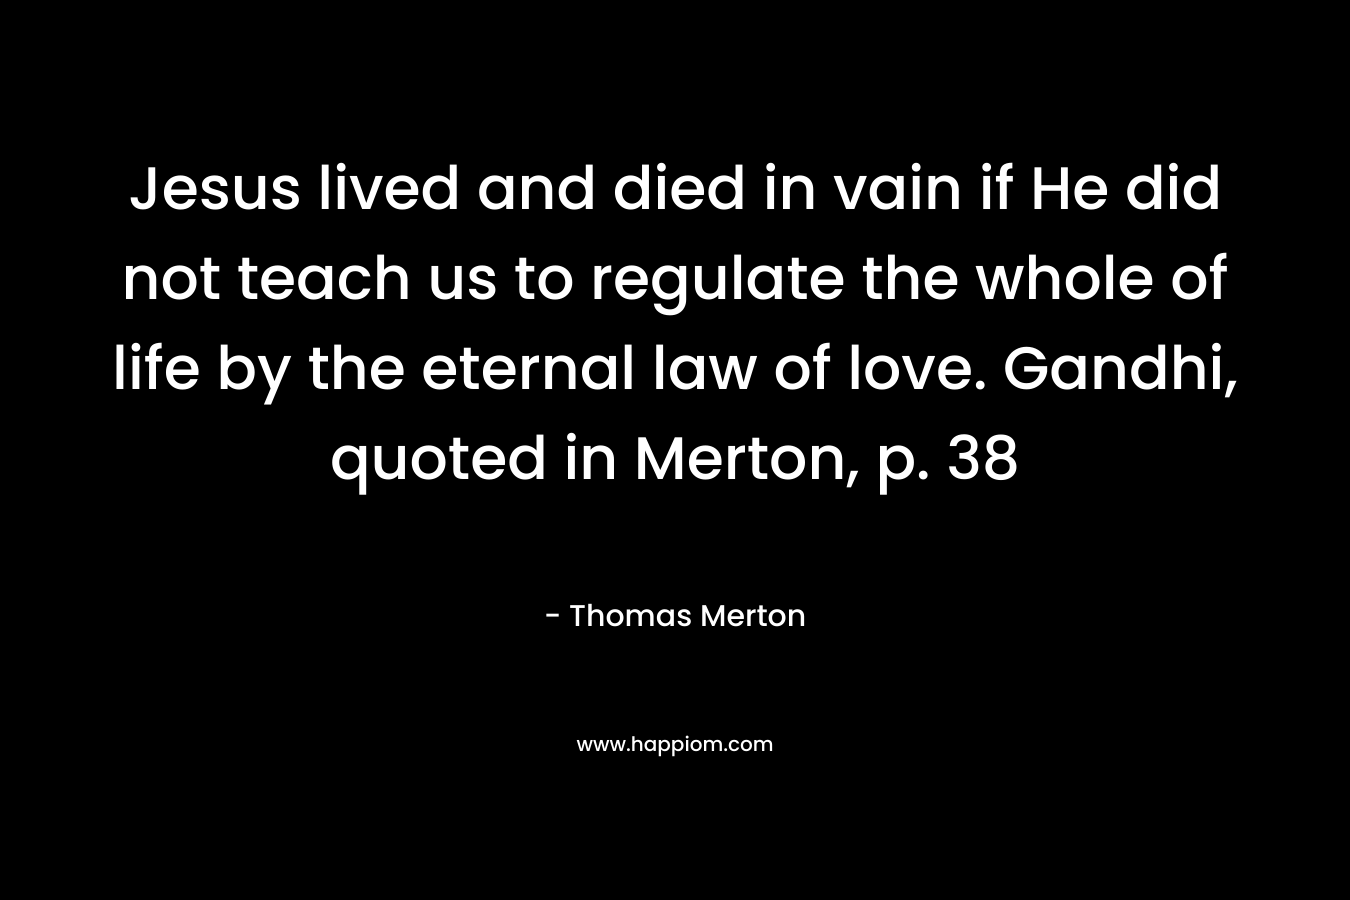 Jesus lived and died in vain if He did not teach us to regulate the whole of life by the eternal law of love. Gandhi, quoted in Merton, p. 38 – Thomas Merton